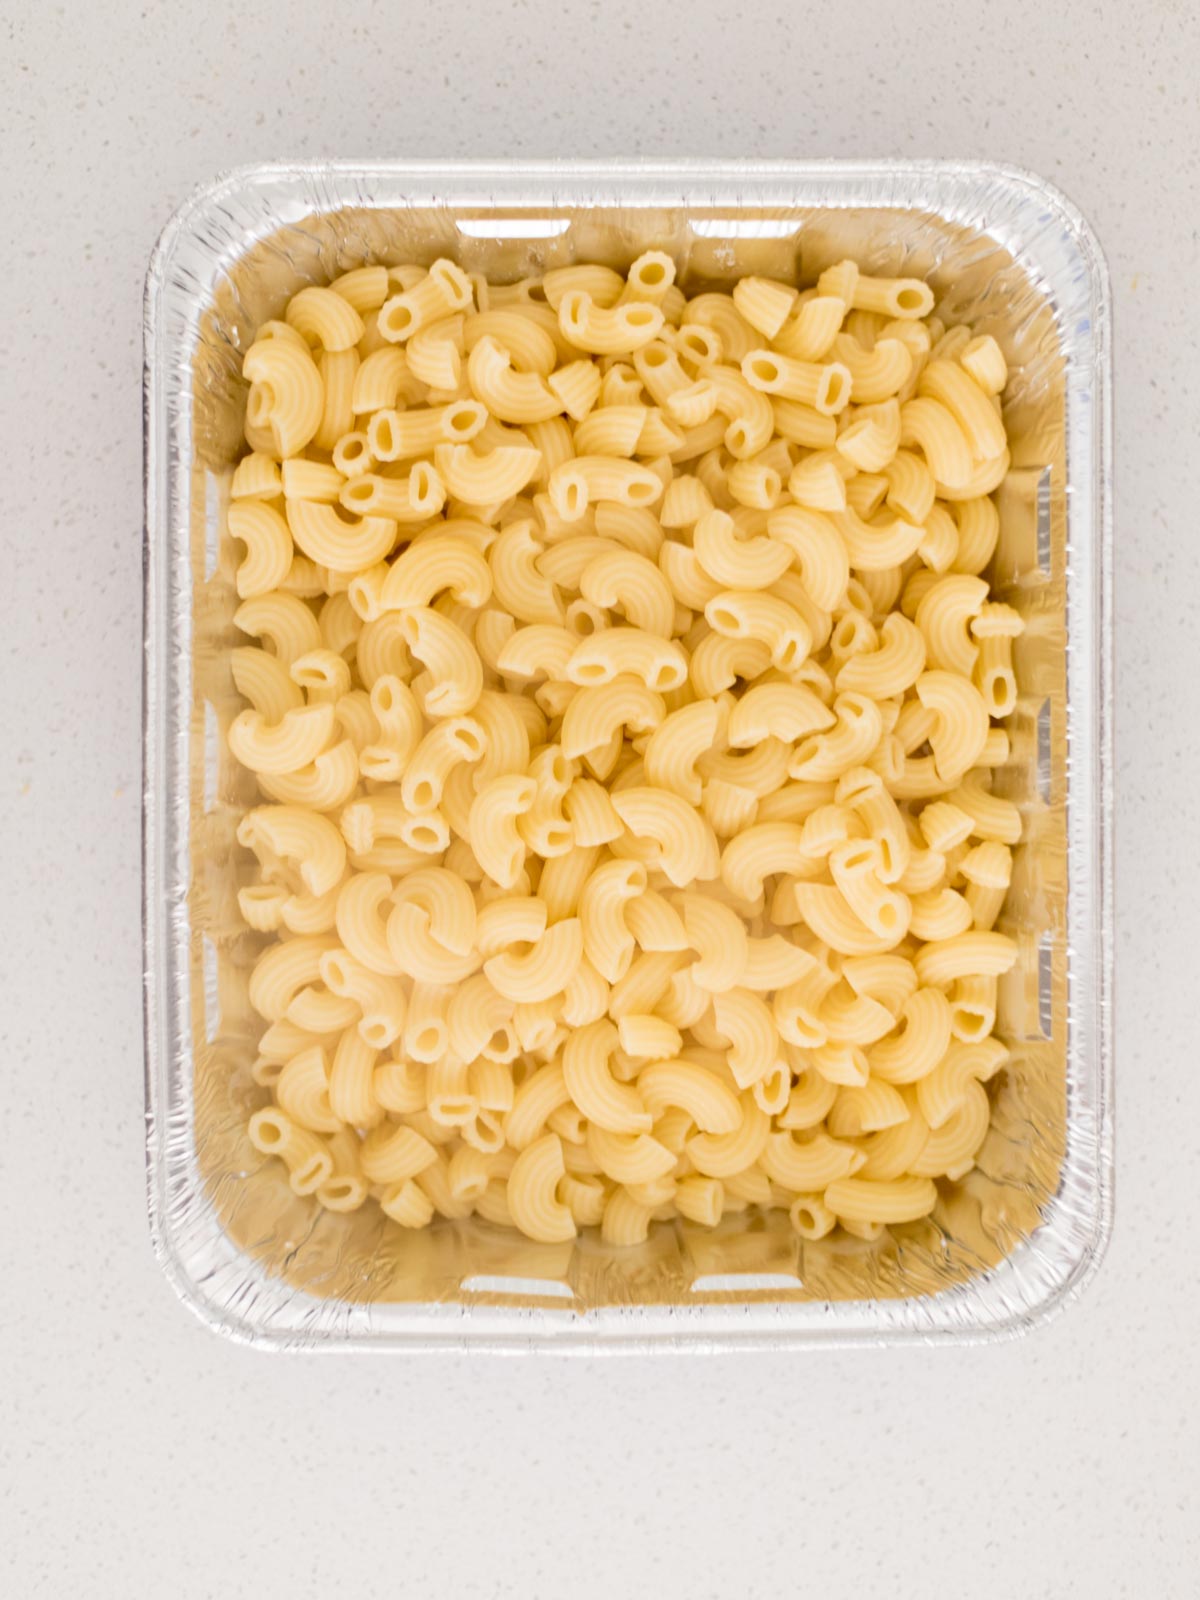 cooked elbow pasta added to a disposable cake pan